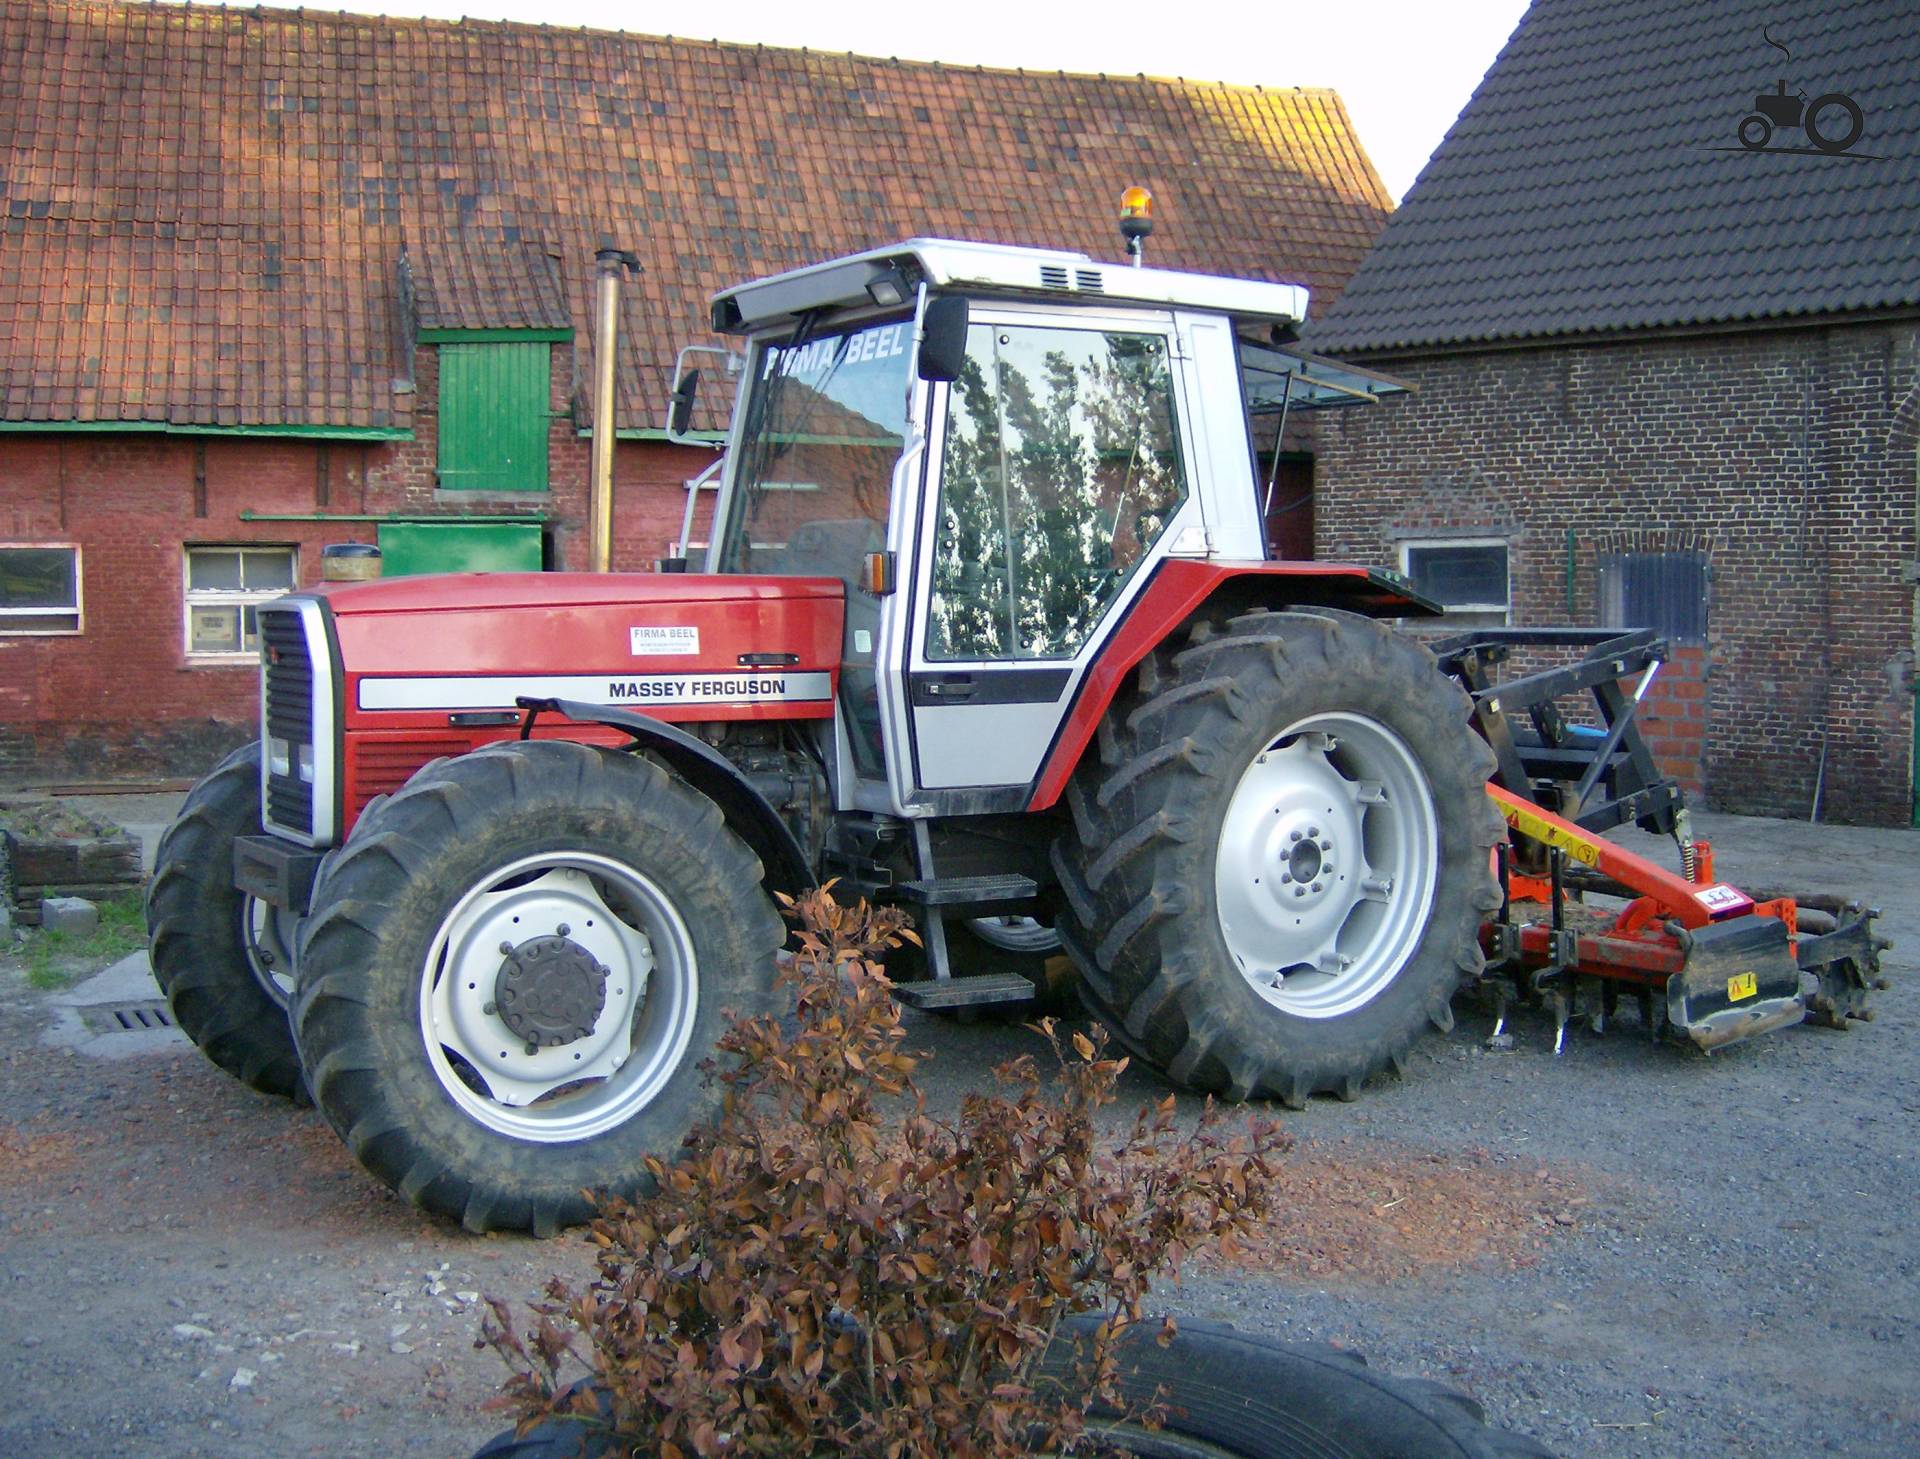 Massey Ferguson 3090 | Picture made by spboy